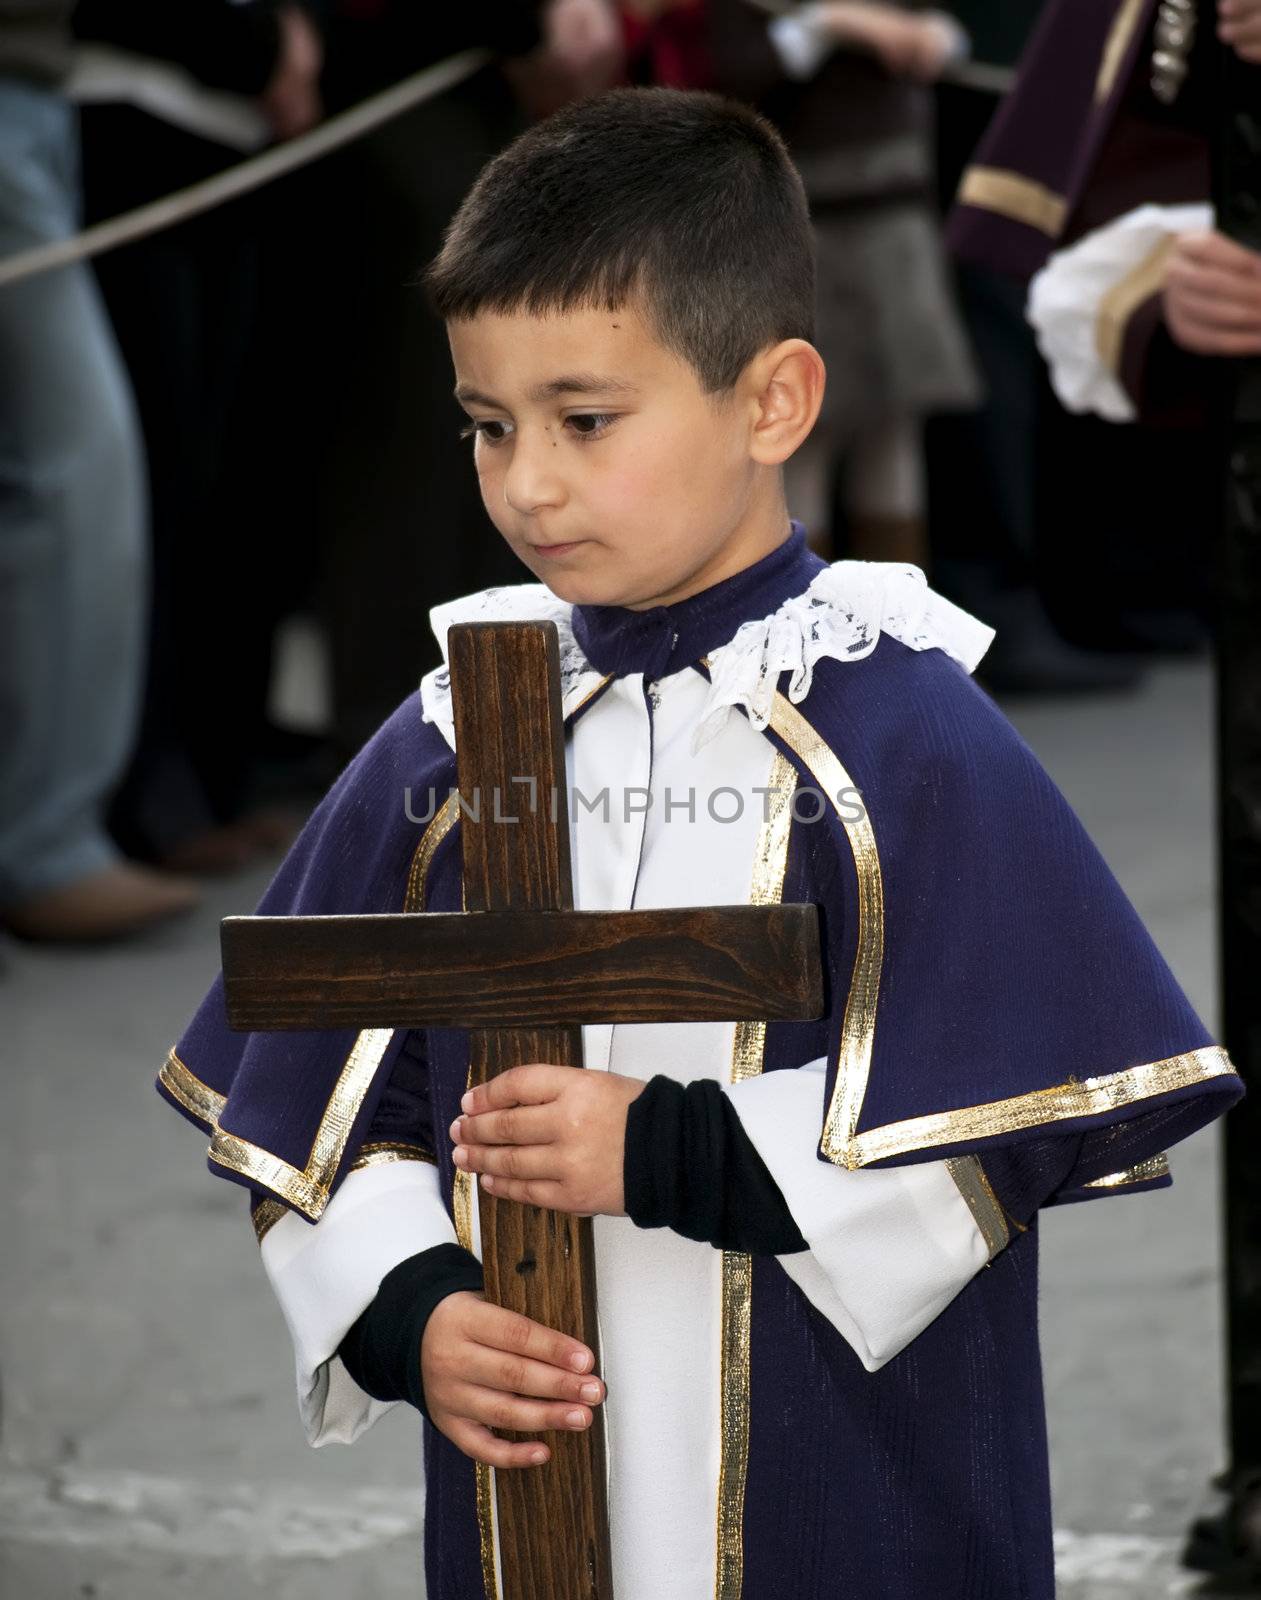 Boy with Cross by PhotoWorks